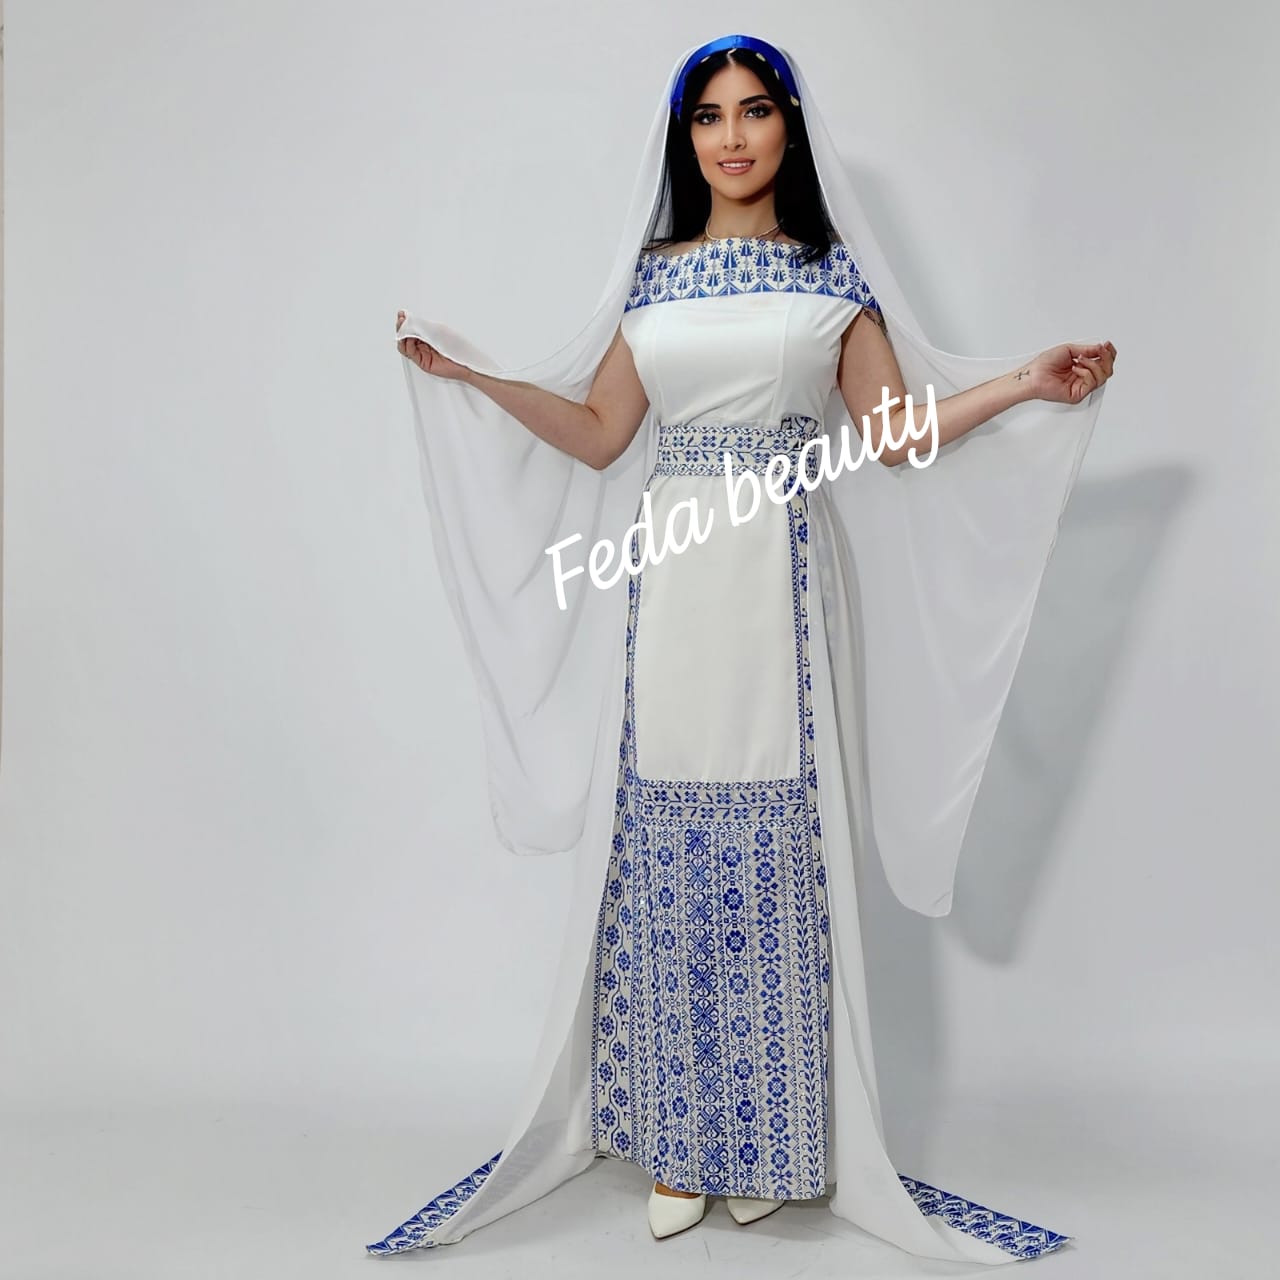 A dress from the new Feda Beauty 2023 collection